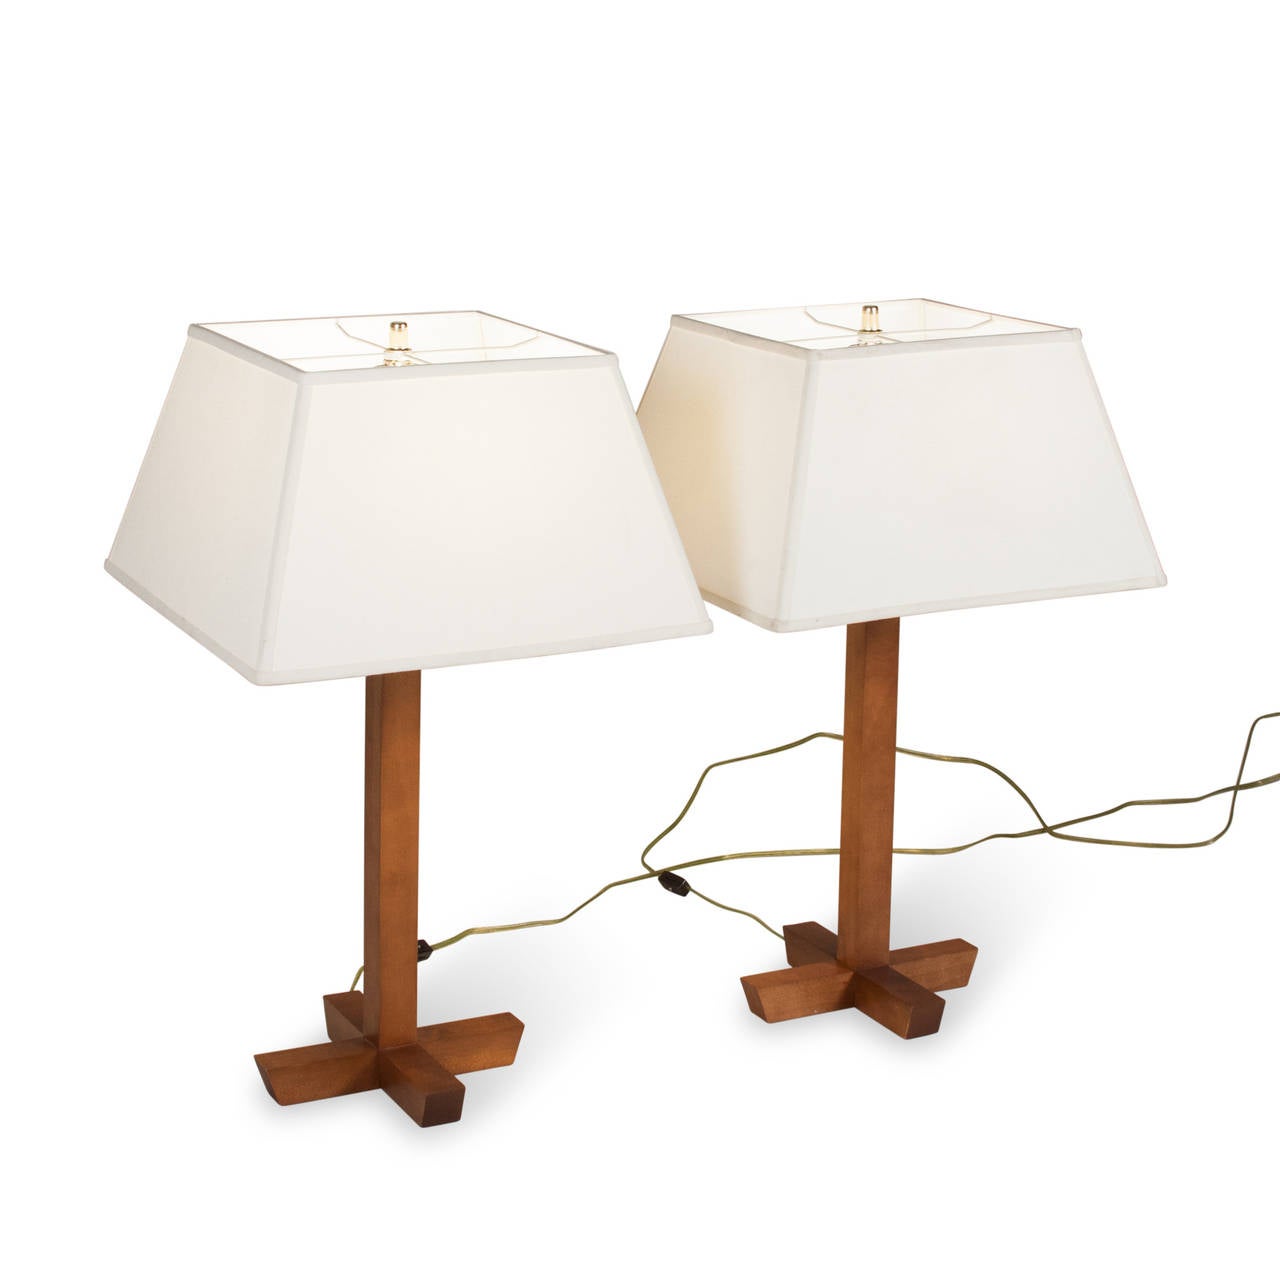 American Pair of Walnut Table Lamps For Sale